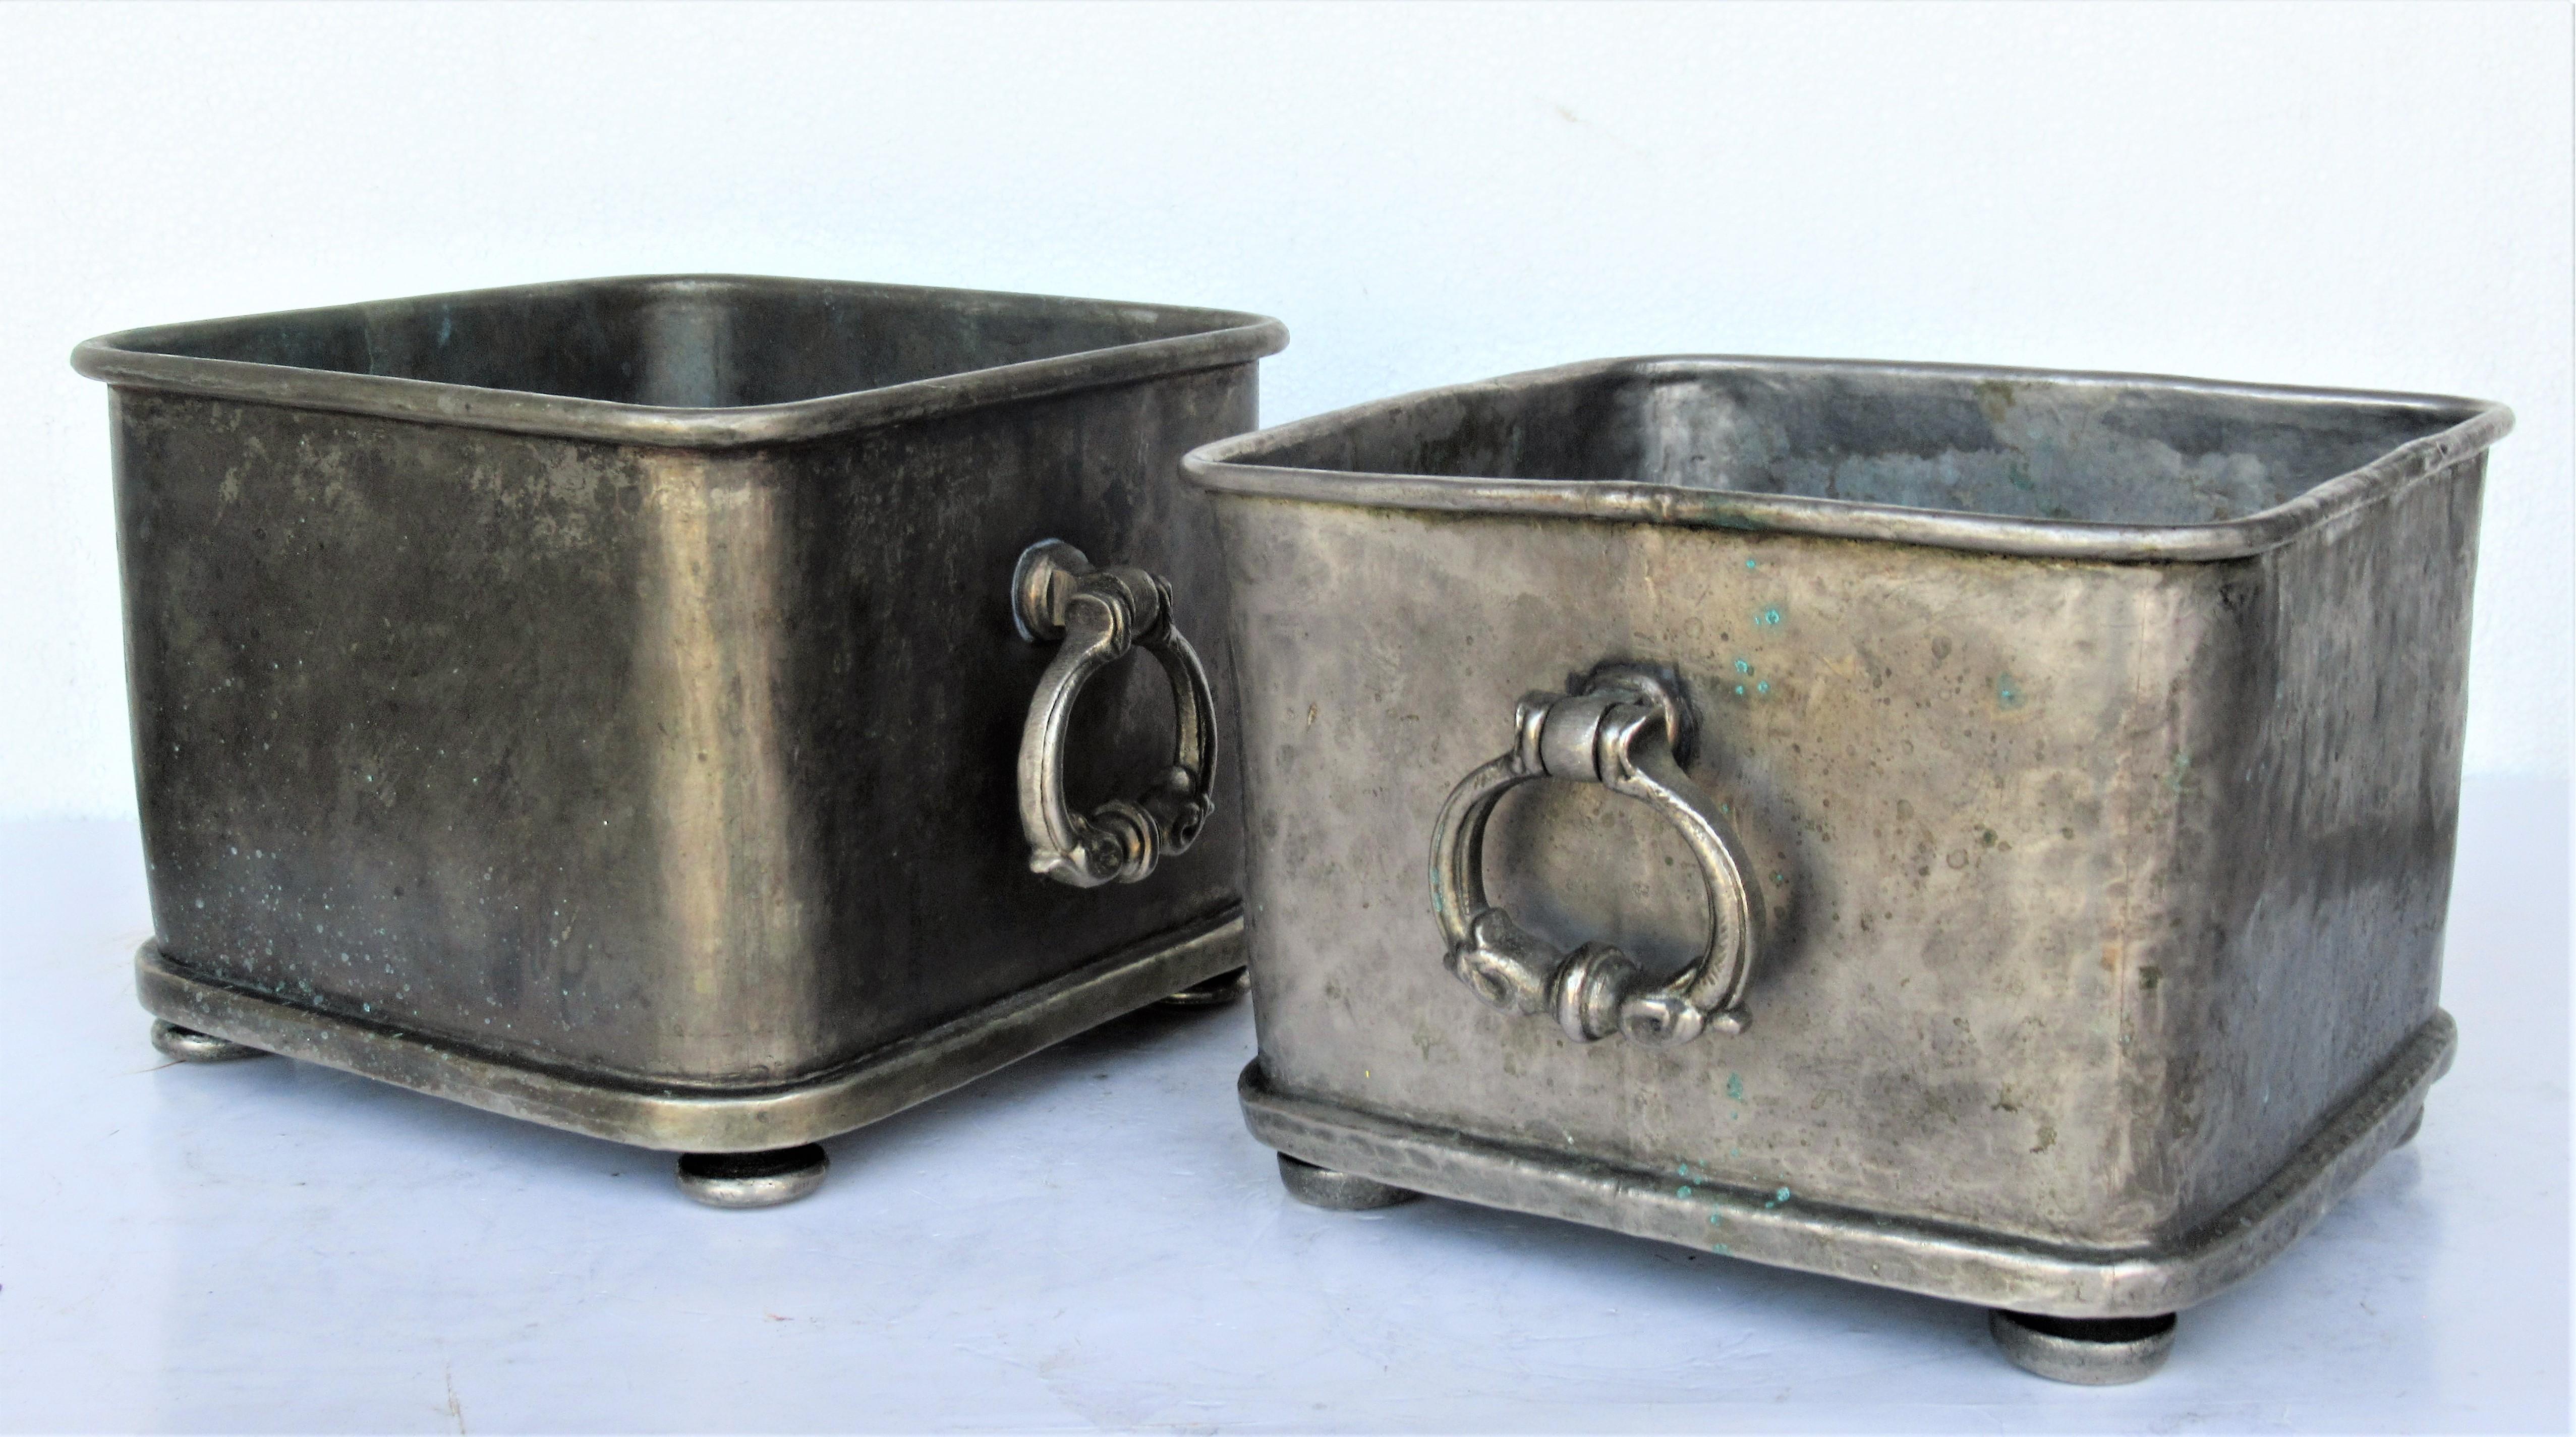 Pair of old silver tinned bronze tabletop cachepot planters - each with four bun feet and decorated swing handles at two sides. Cast stamped on underside Mauritius with crown mark, Made in Italy, a tree branch design with numbers and letters, paper